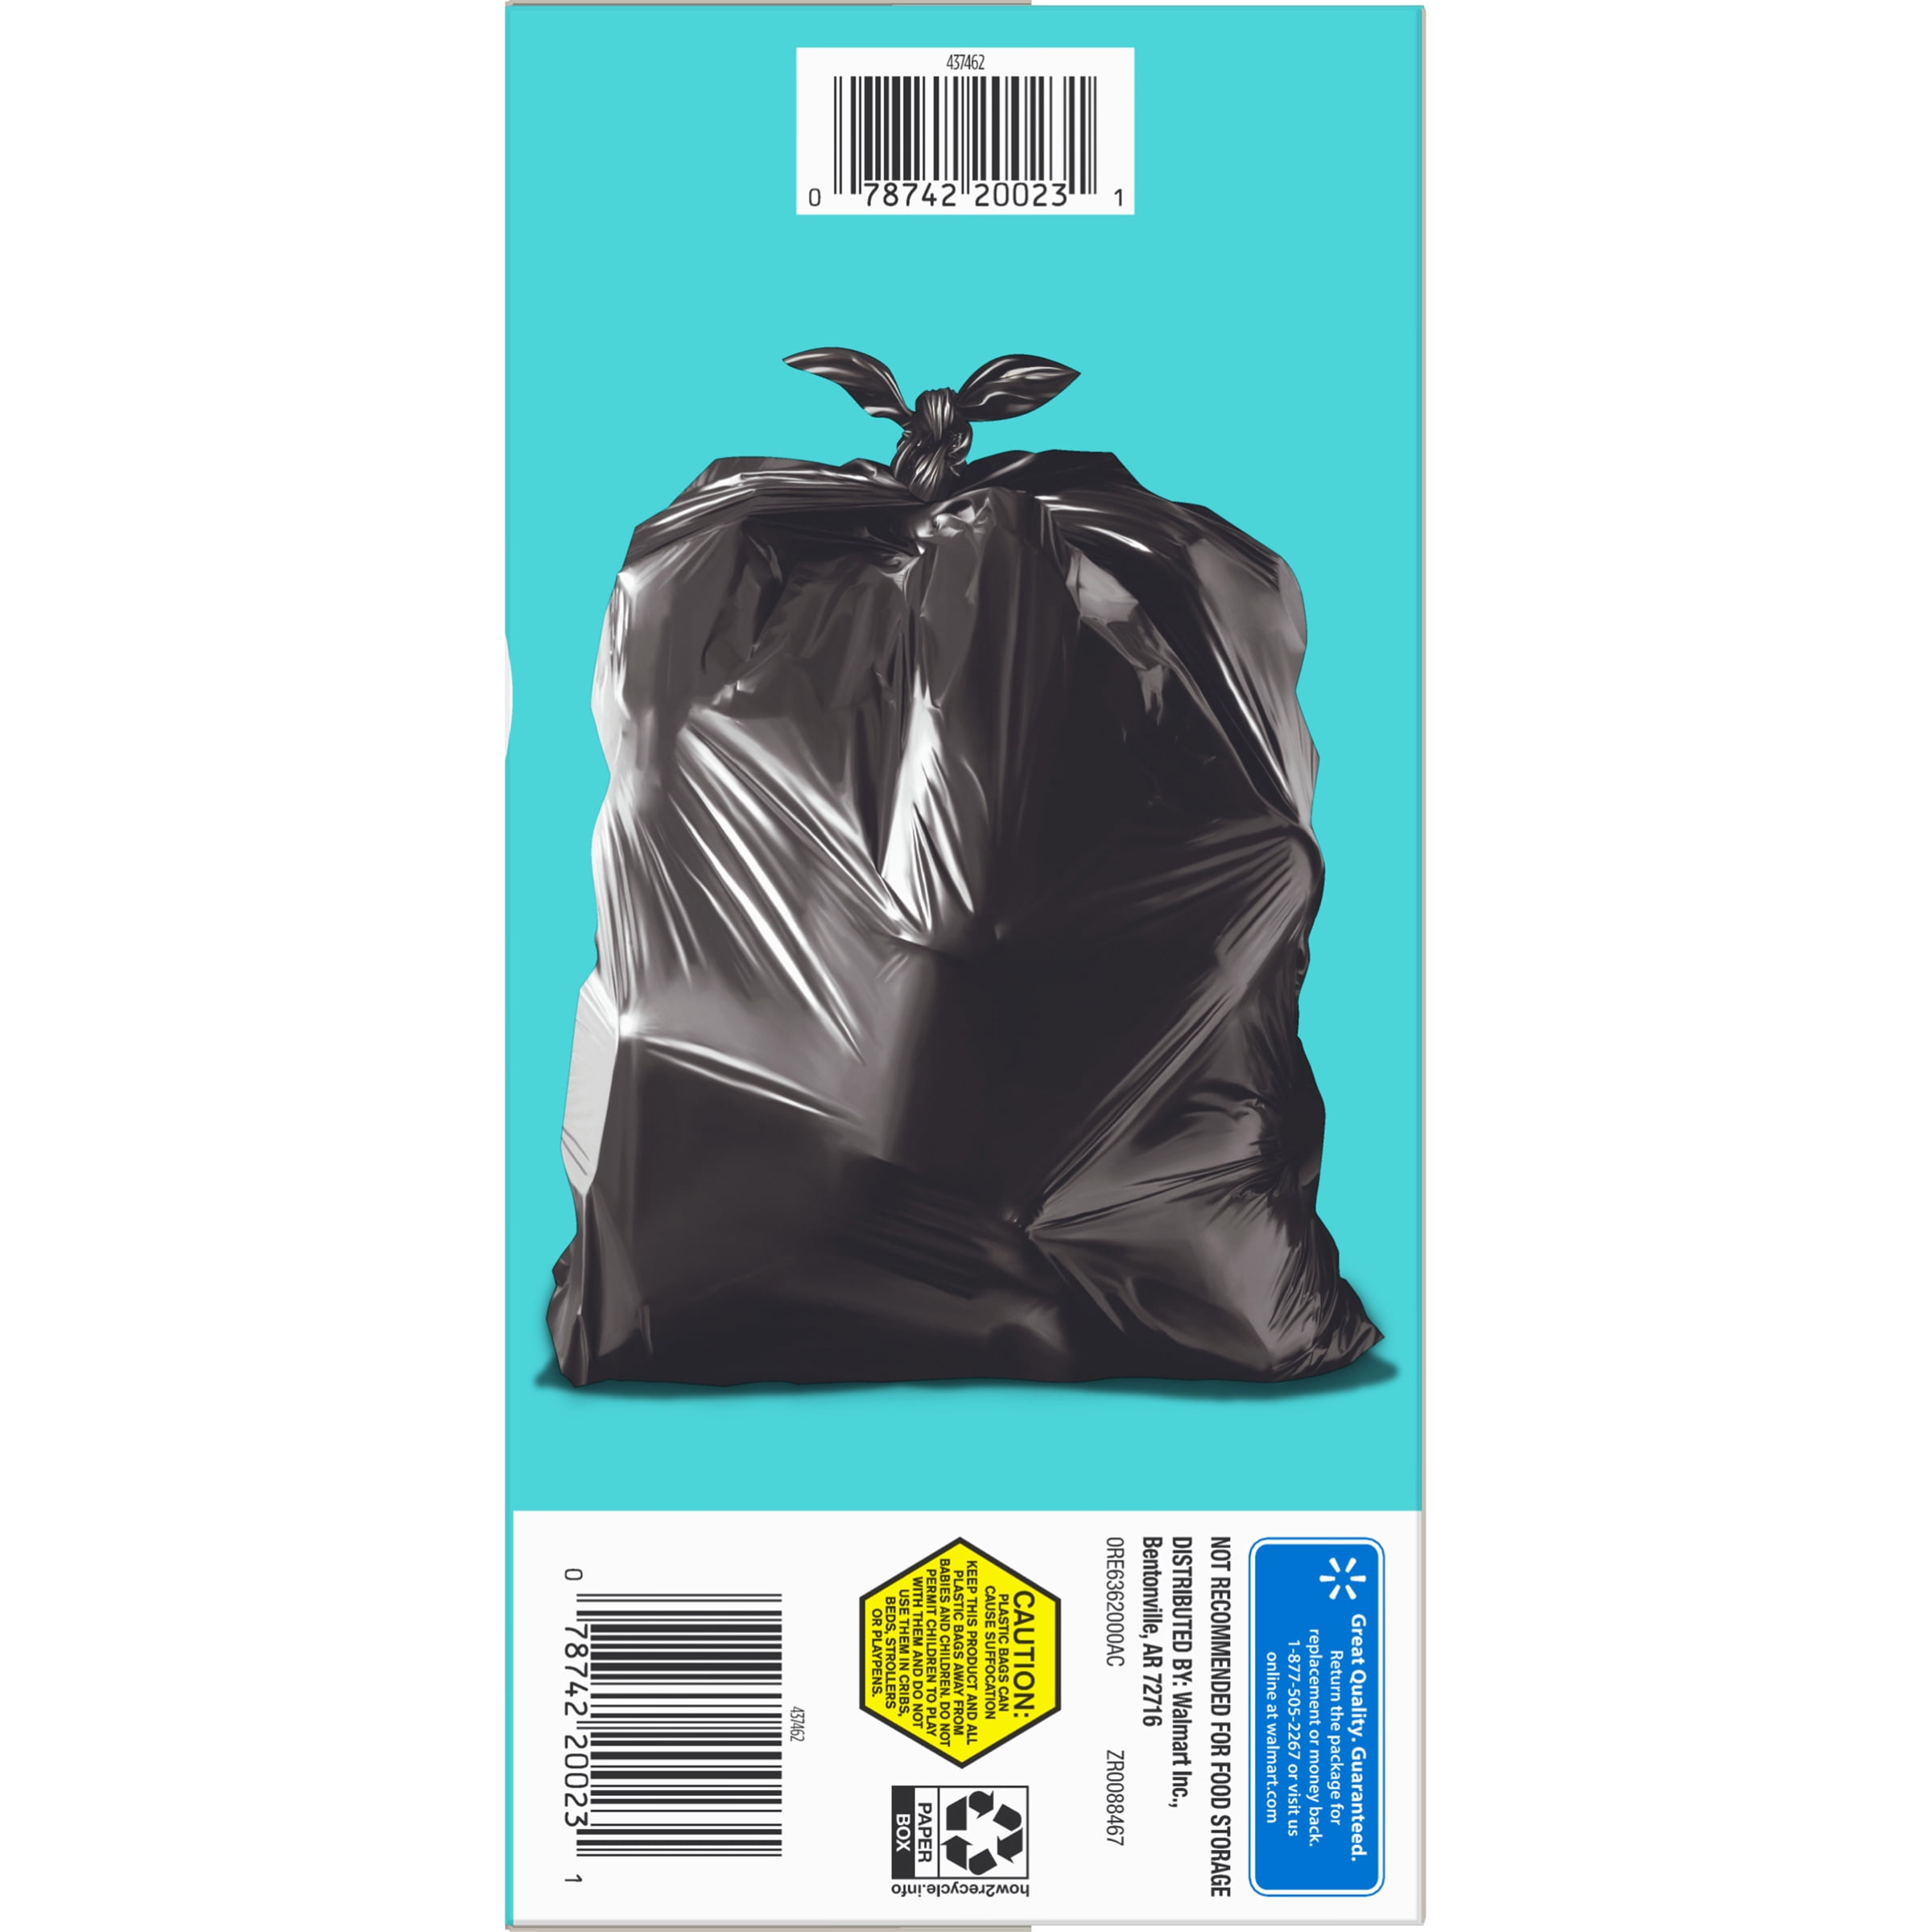 Best Price and Value for Garbage Bags (Karrie's Research project)